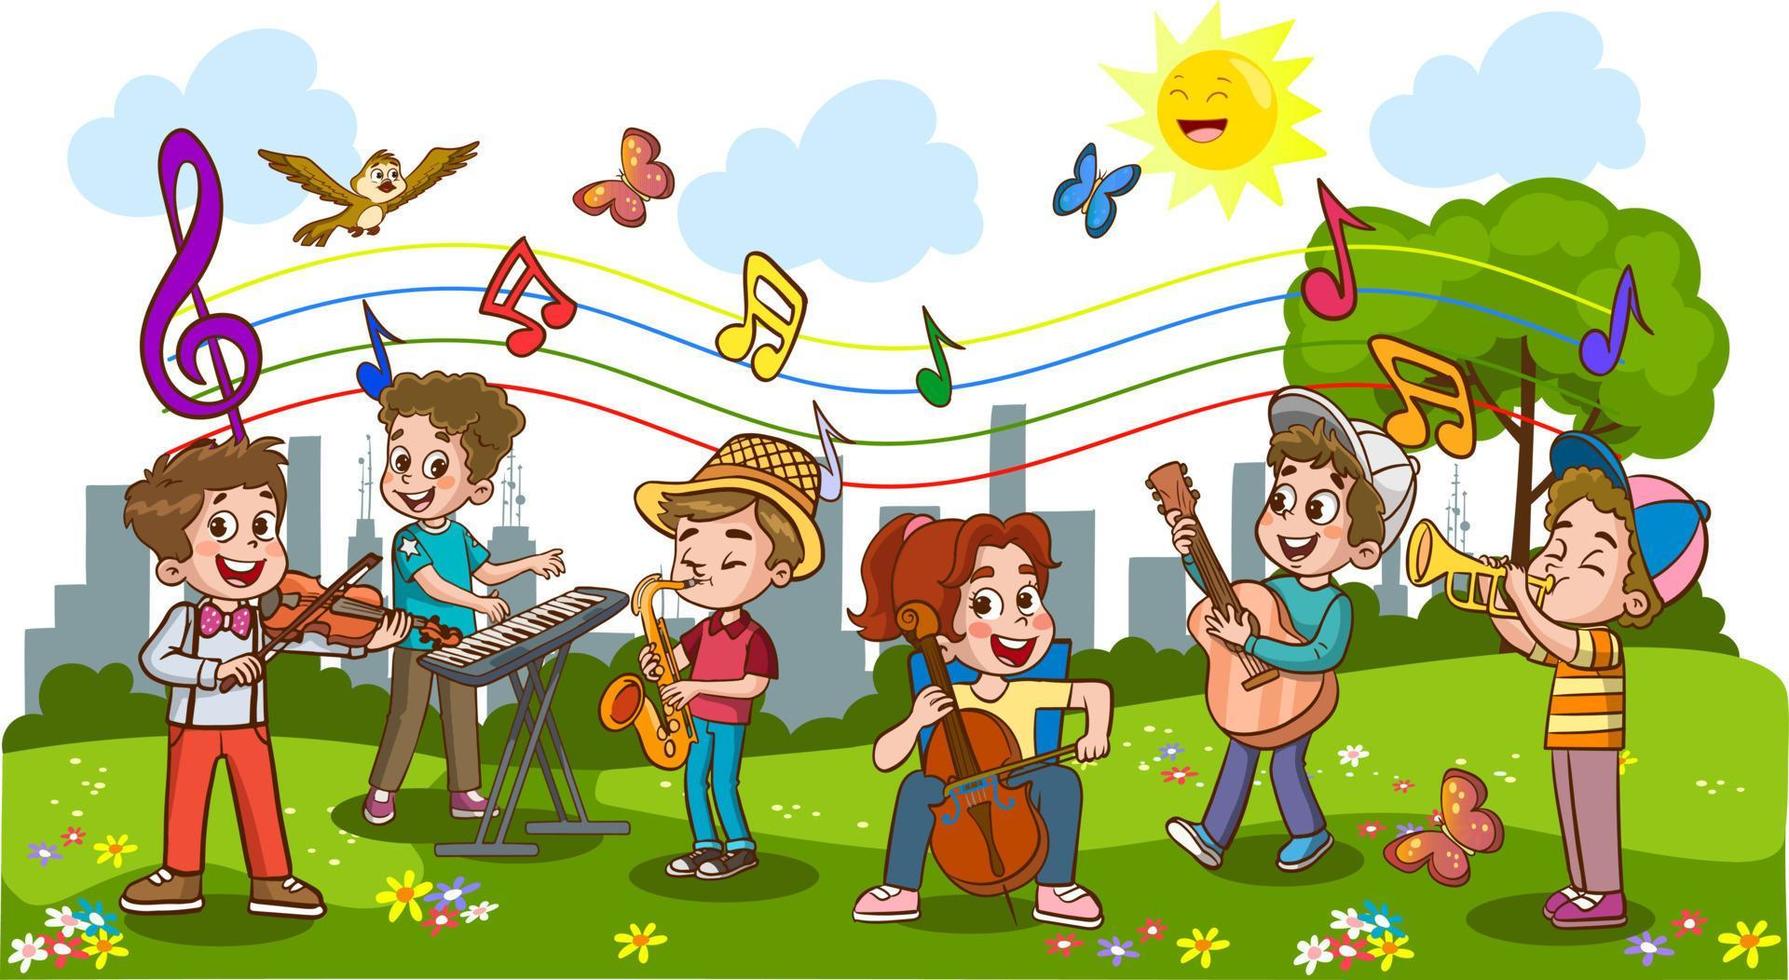 Cartoon group of children singing and dancing in the school choir vector